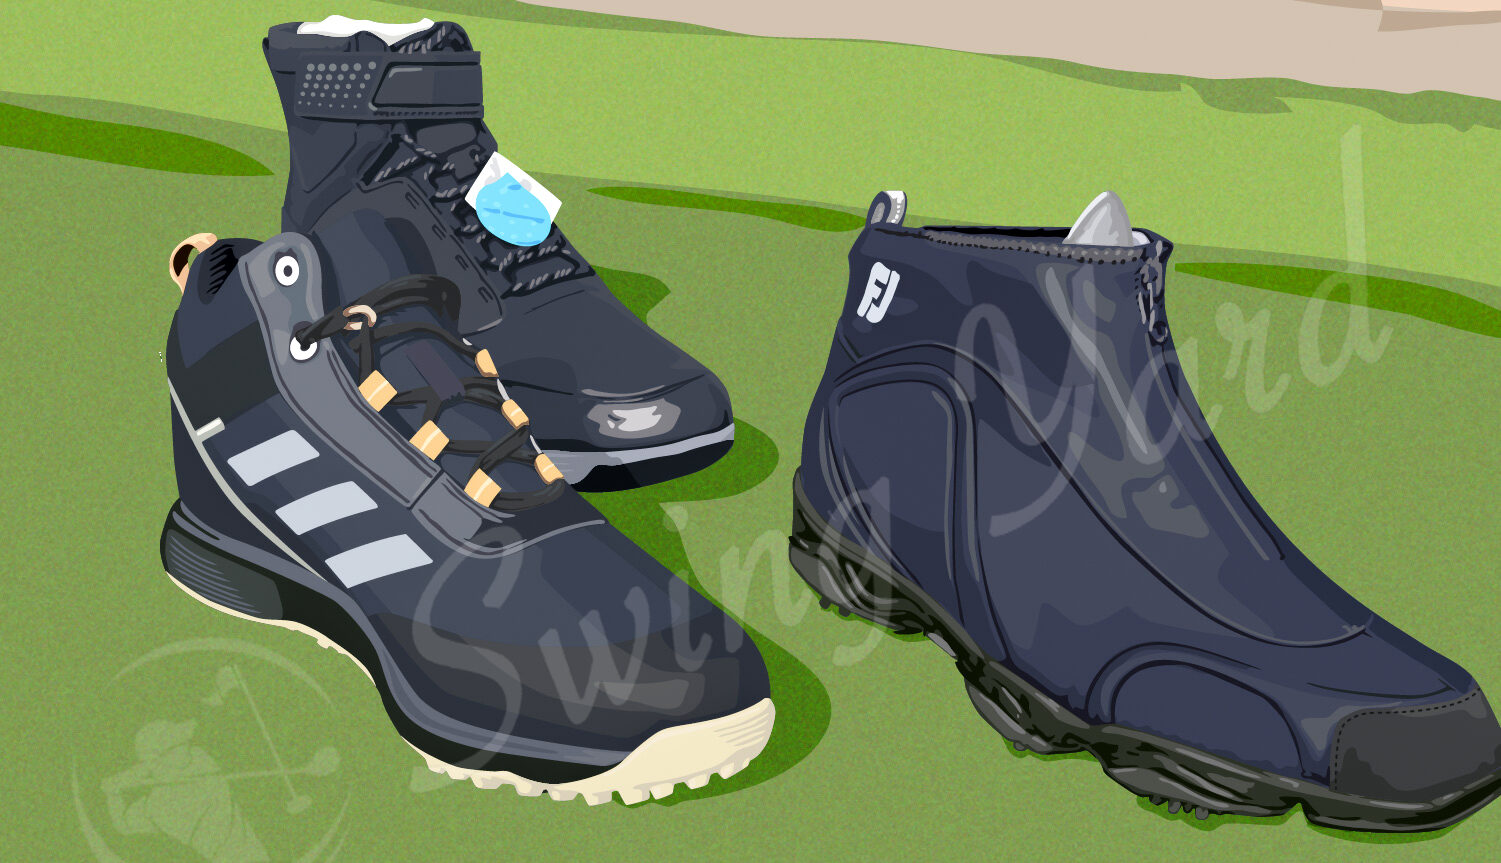 Several different cold weather golf shoes and boots